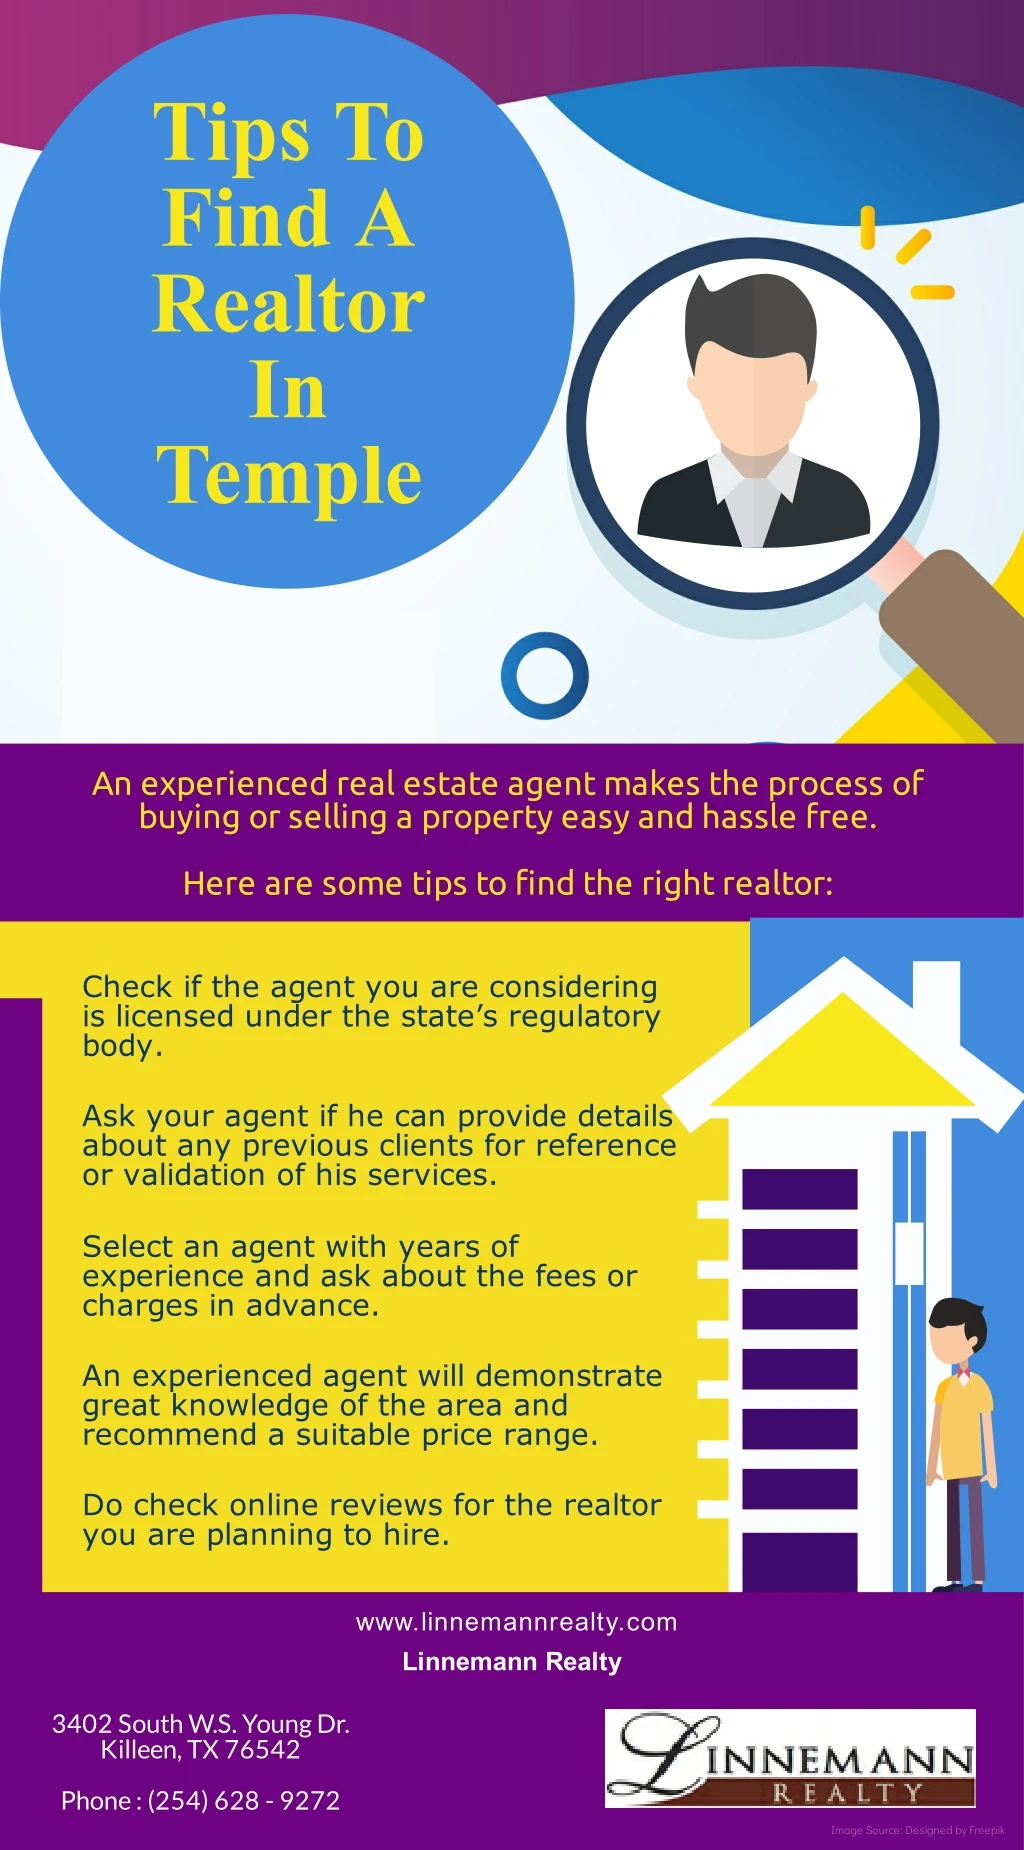 tips to find a realtor in temple